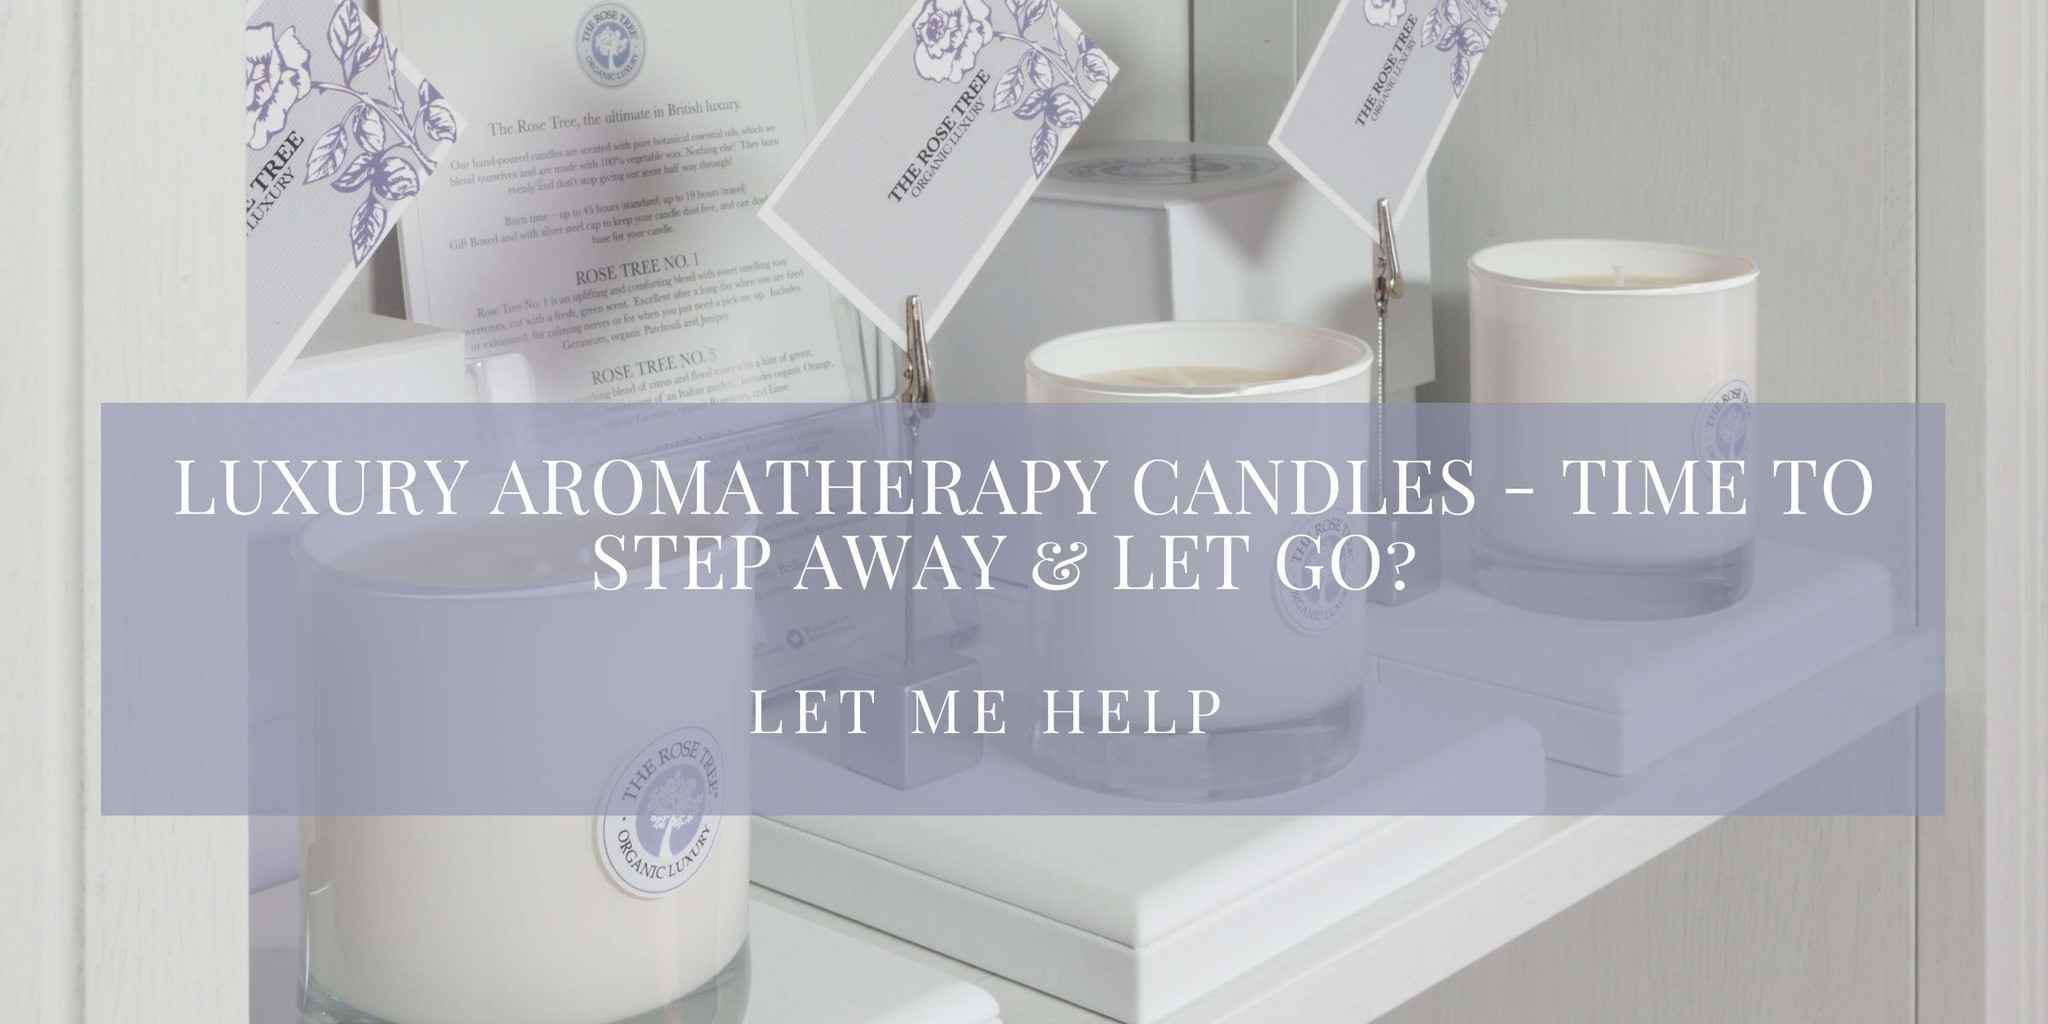 The Rose Tree Aromatherapy Candles